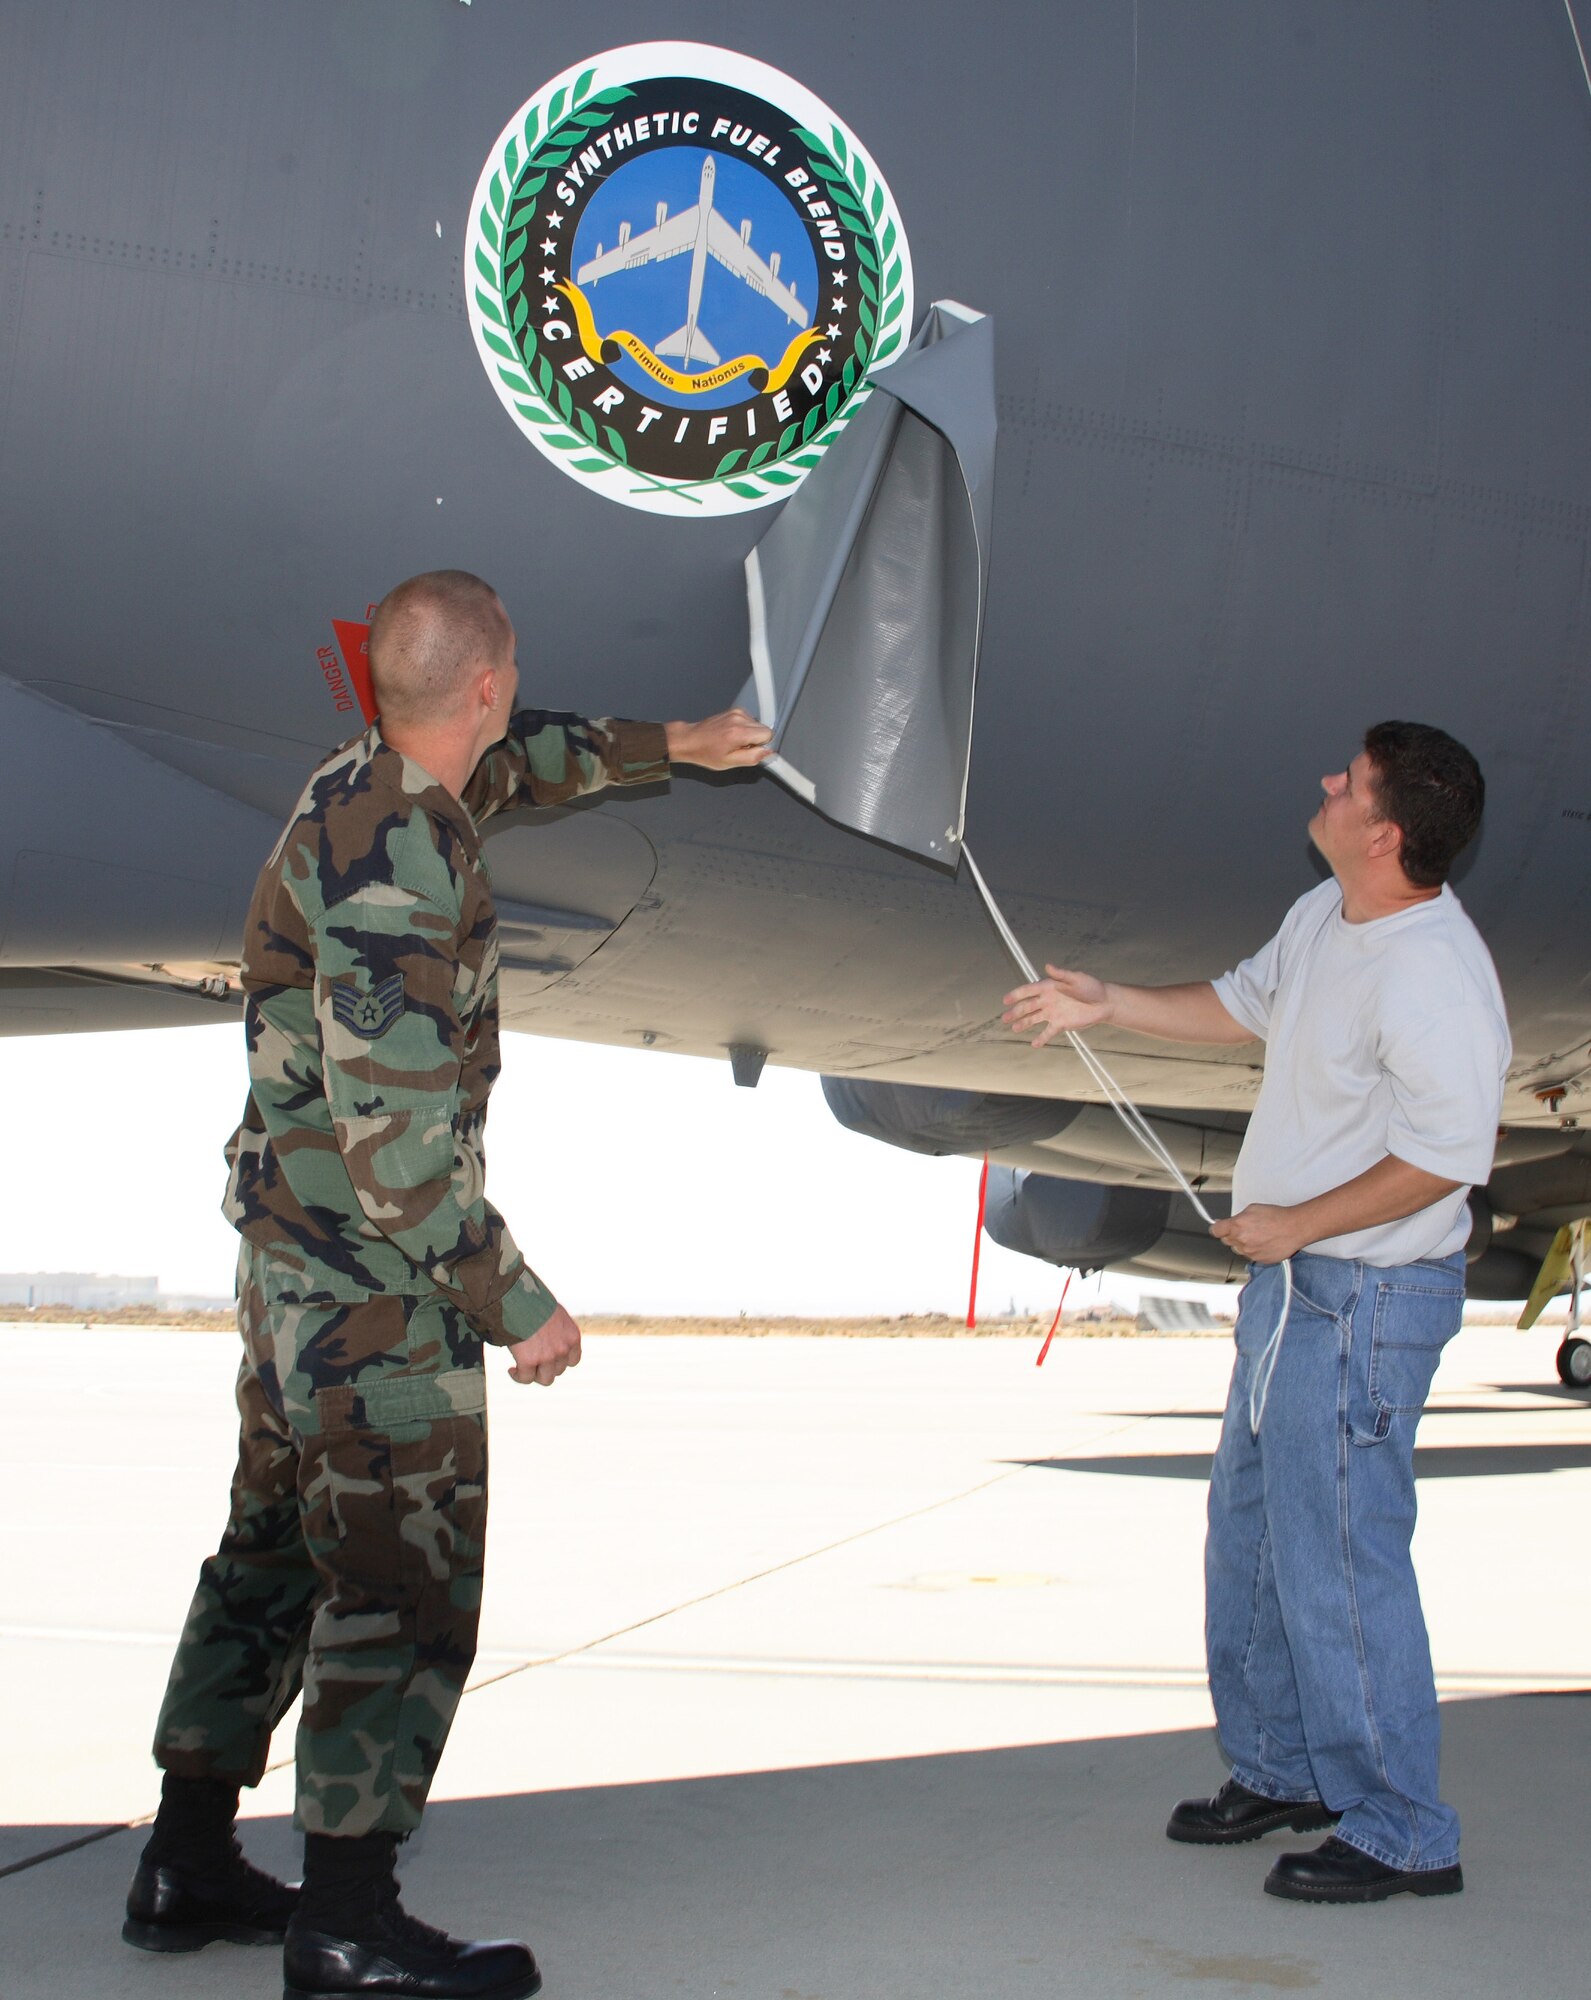 EDWARDS AIR FORCE BASE, Calif. -- Staff Sgt. Joe Wallis, 31st Test and Evaluation Squadron, and Johnny Sniderhan, 912th Aircraft Maintenance Squadron, reveal the Fischer-Tropsch synthetic fuel blend certification logo painted on the side of a B-52H at the certification ceremony here Aug. 8. (Photo by Jet Fabara)